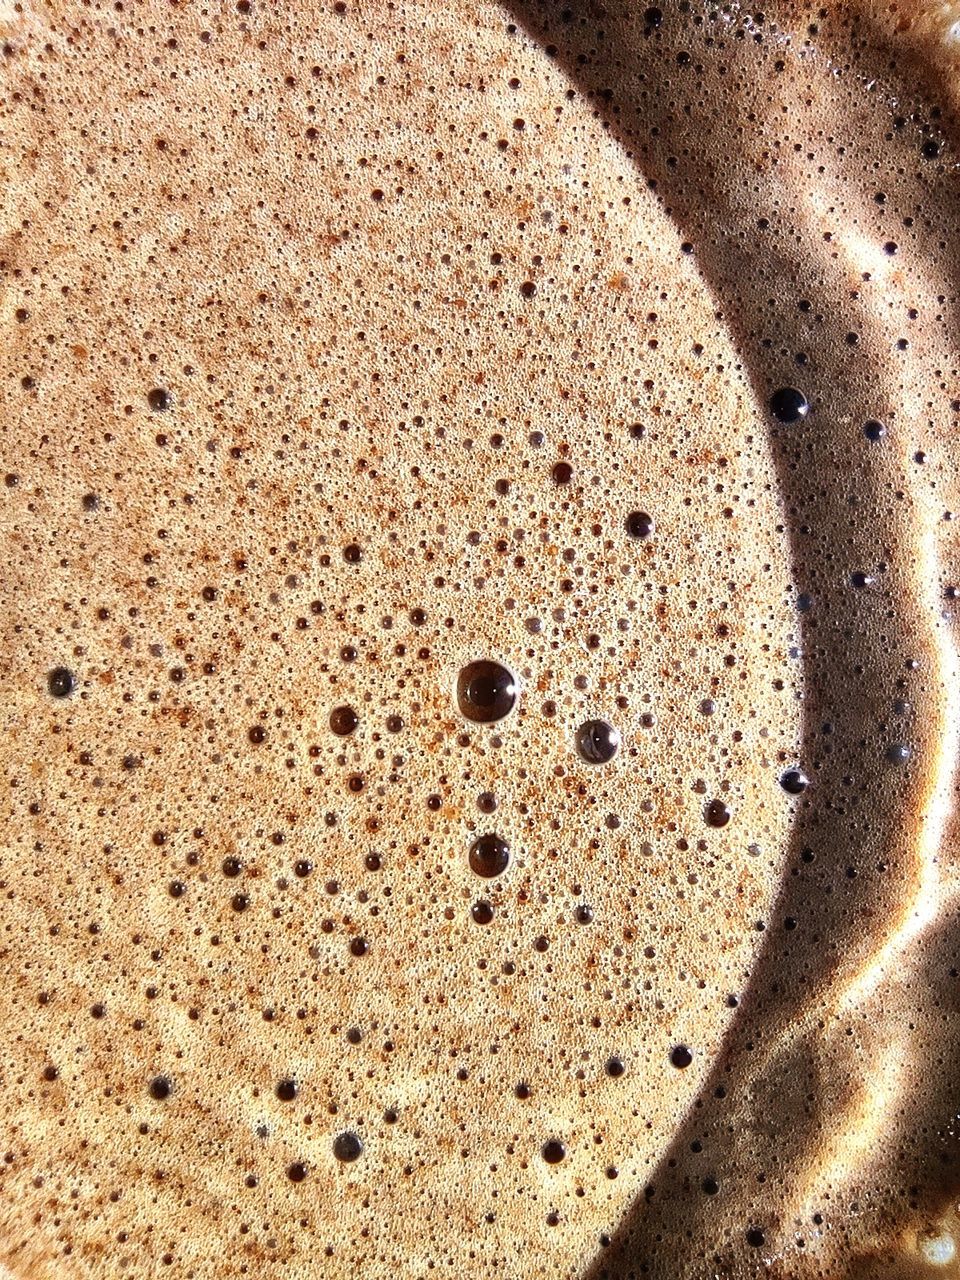 close-up, coffee, backgrounds, no people, full frame, drink, frothy drink, food and drink, pattern, indoors, directly above, food, refreshment, bubble